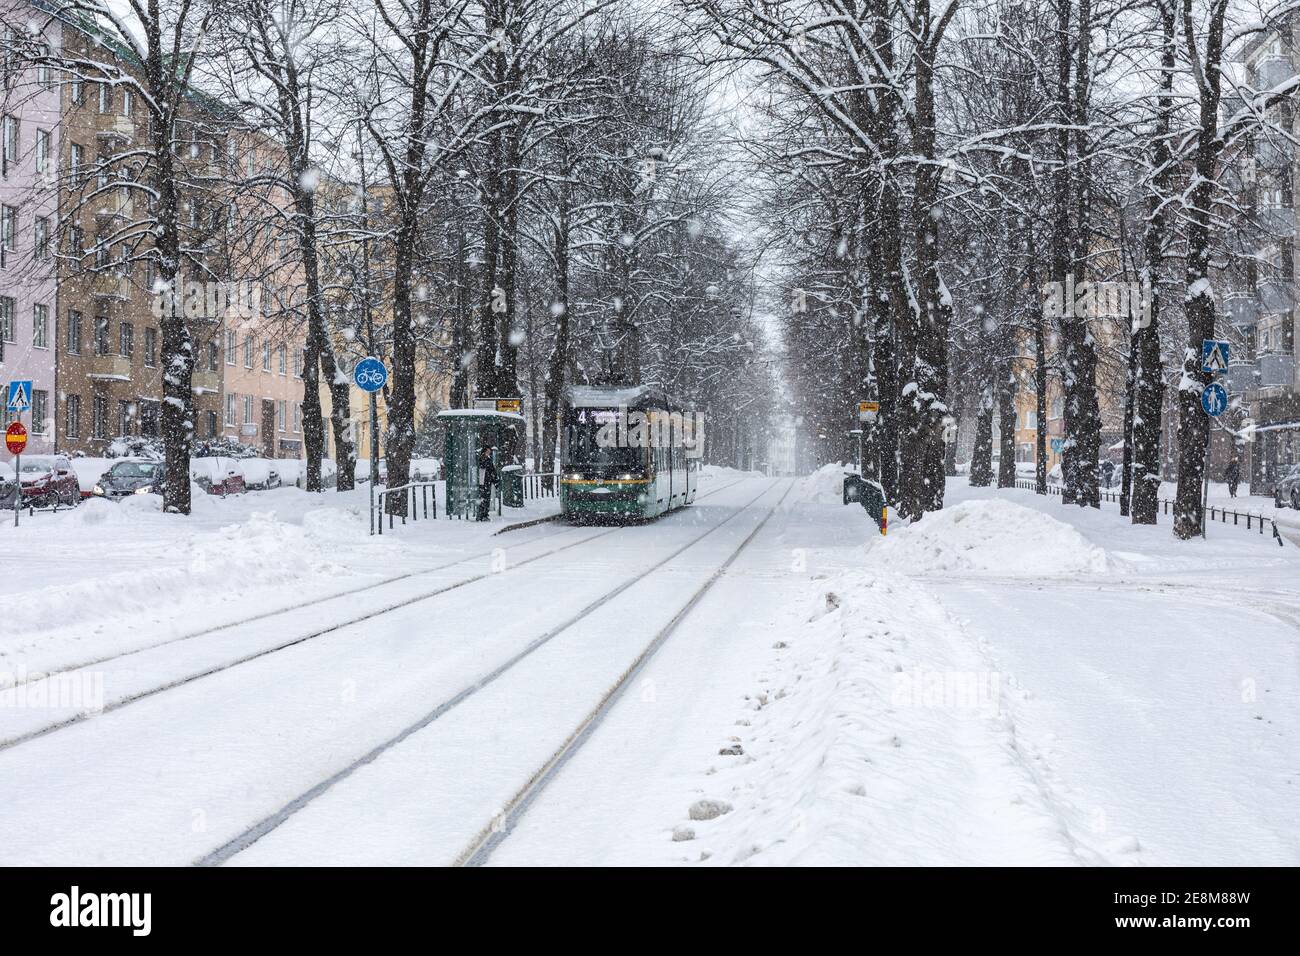 Tram 463 on line 4 at tram stop during snowfall in Munkkiniemi district of Helsinki, Finland Stock Photo